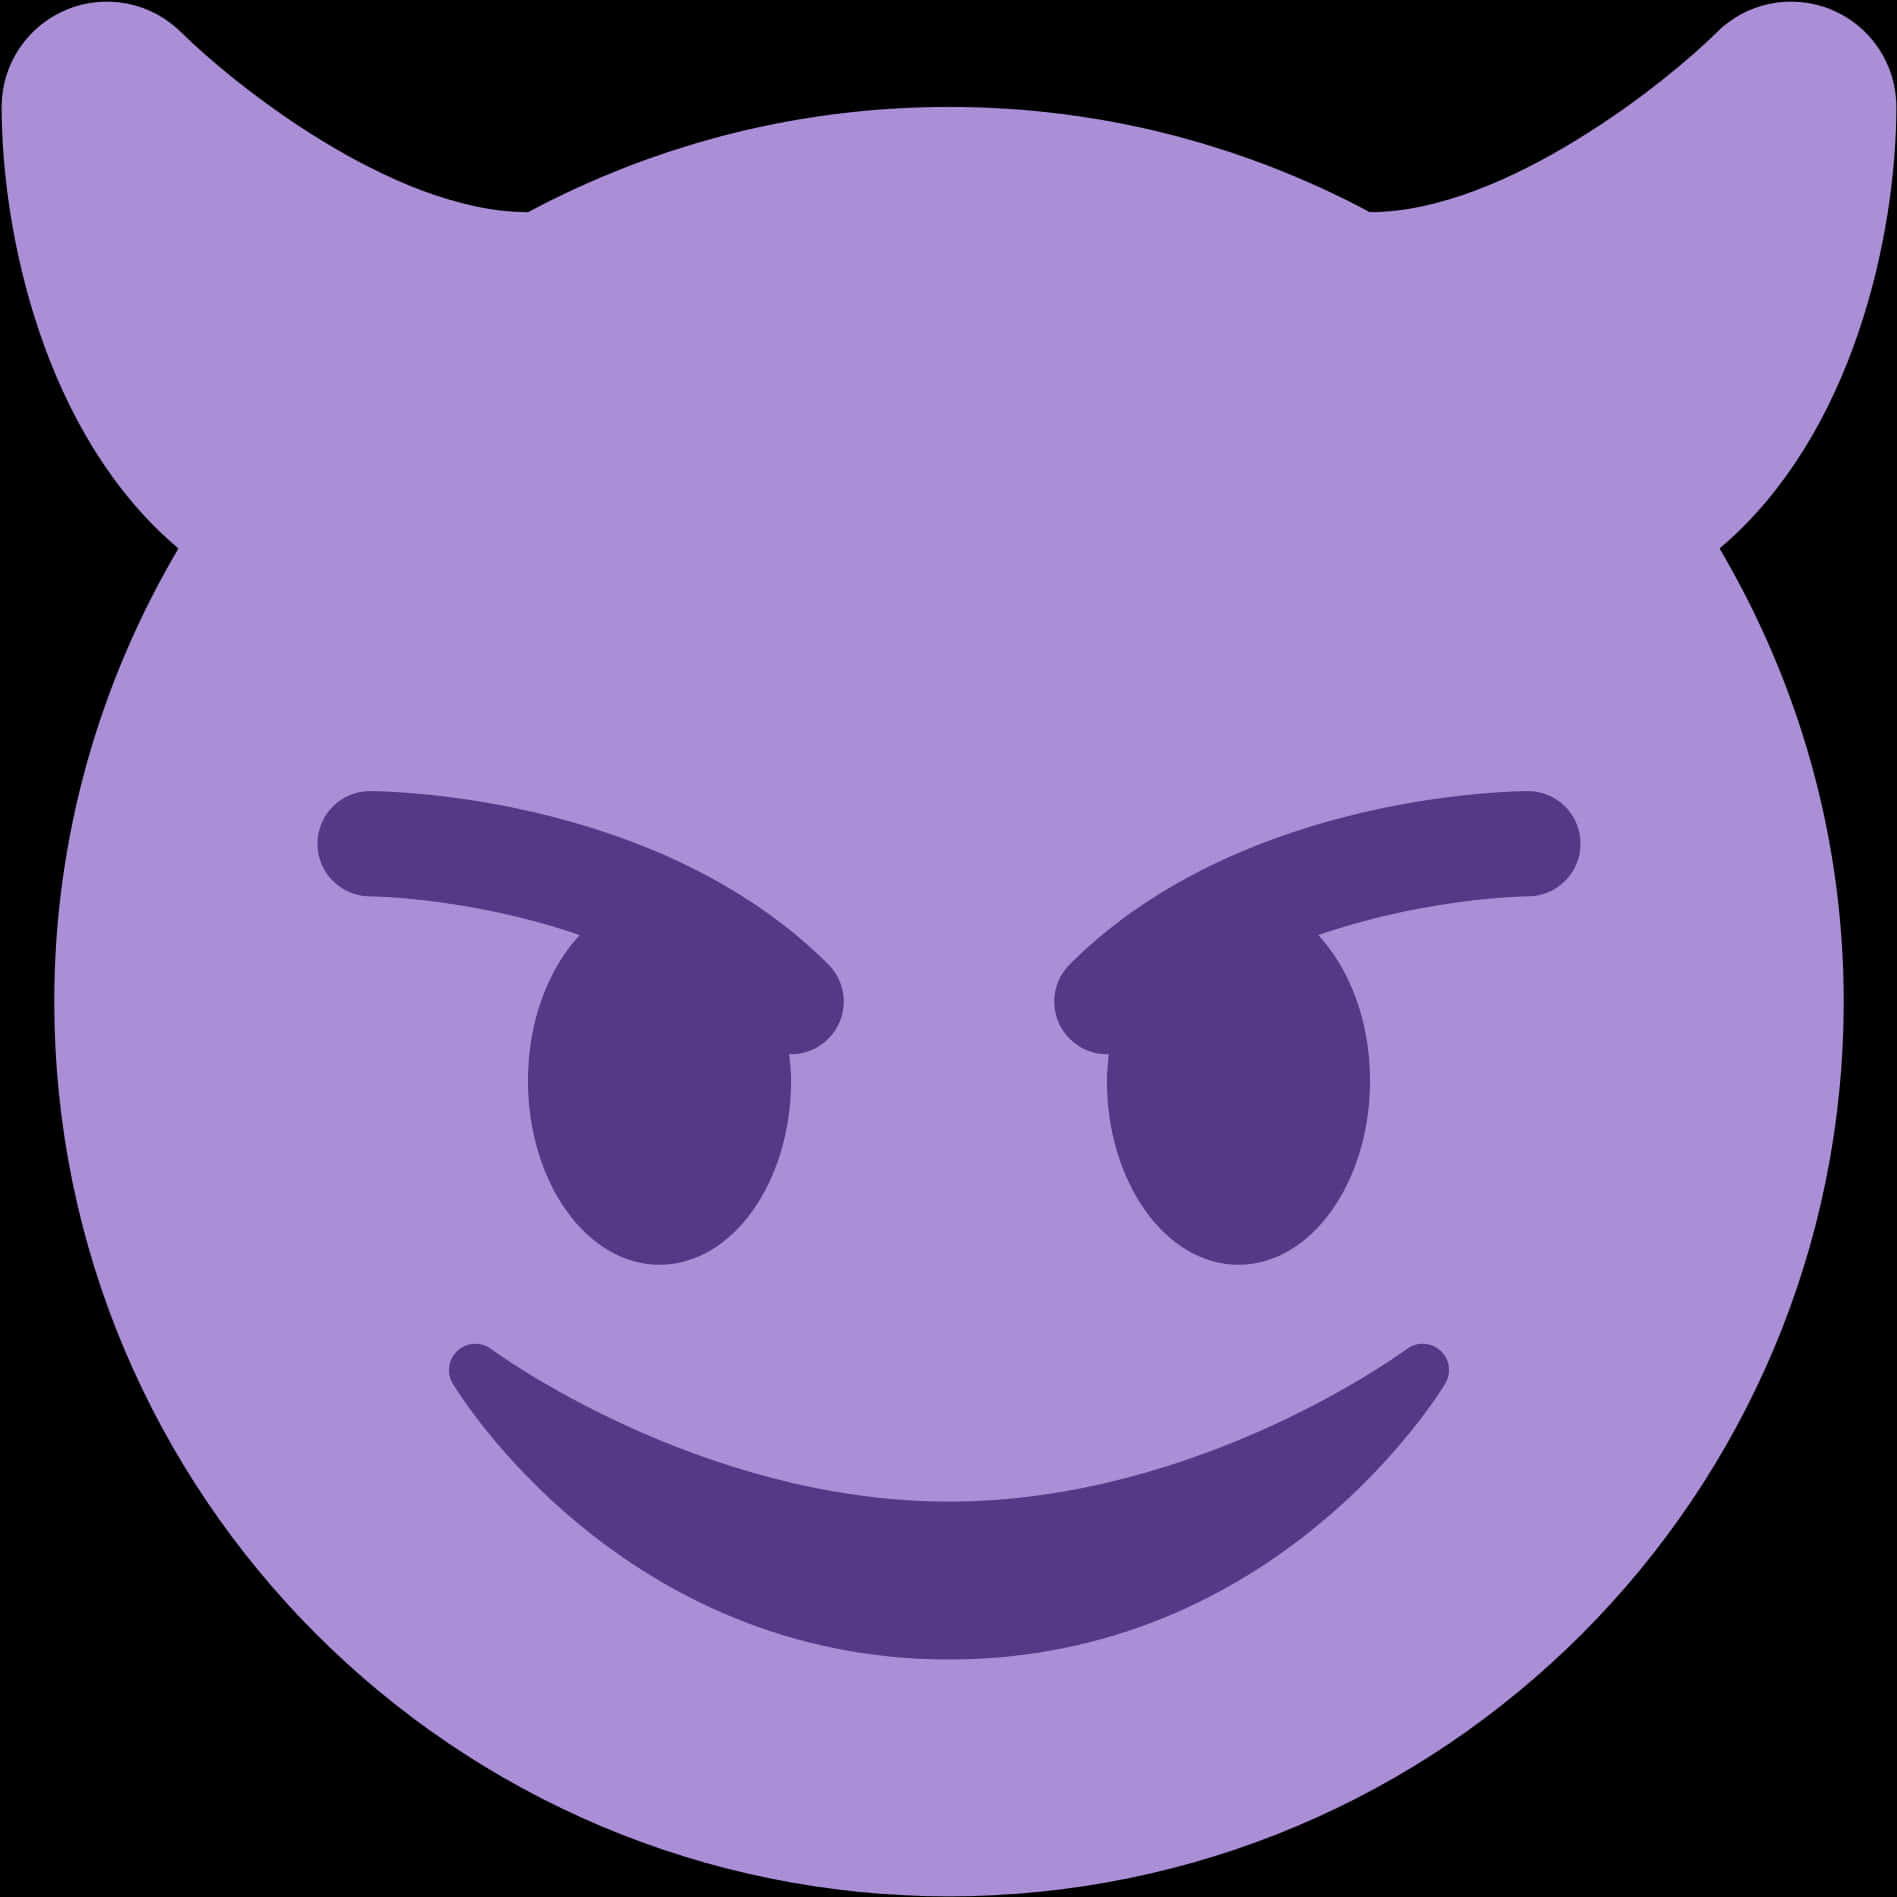 A Purple Emoji With Horns And Eyes